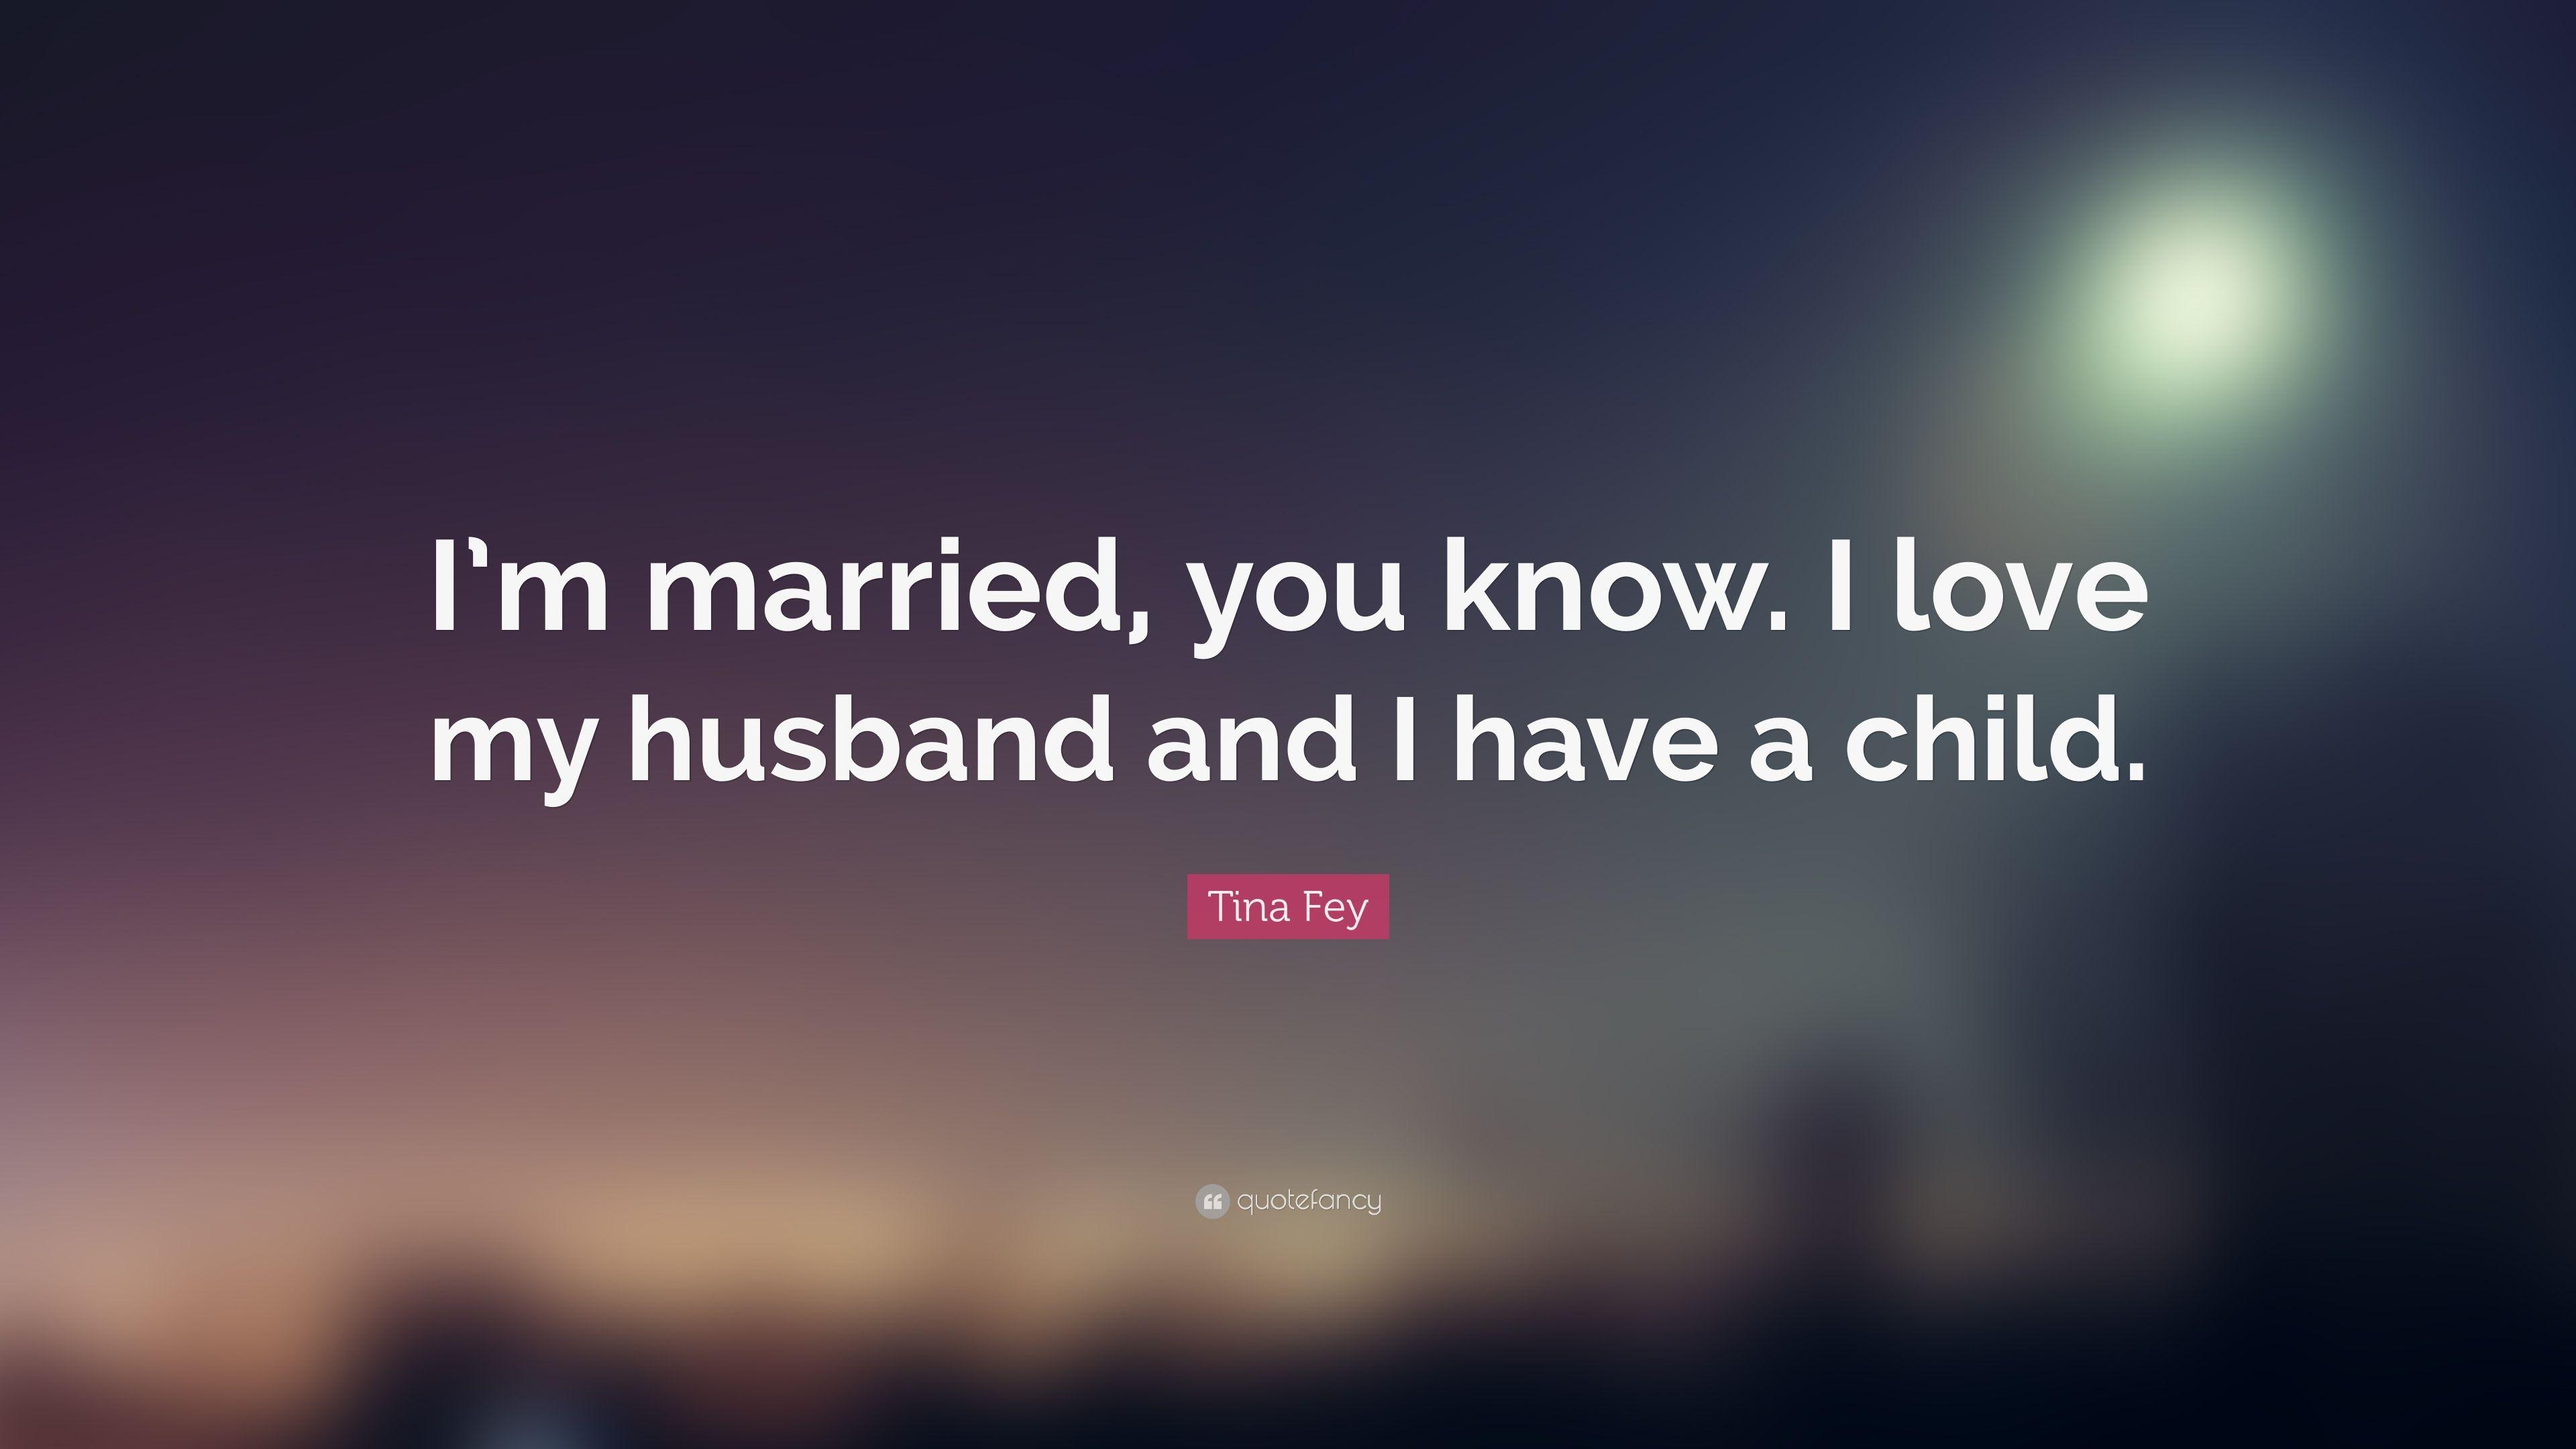 Tina Fey Quote “I m married you know I love my